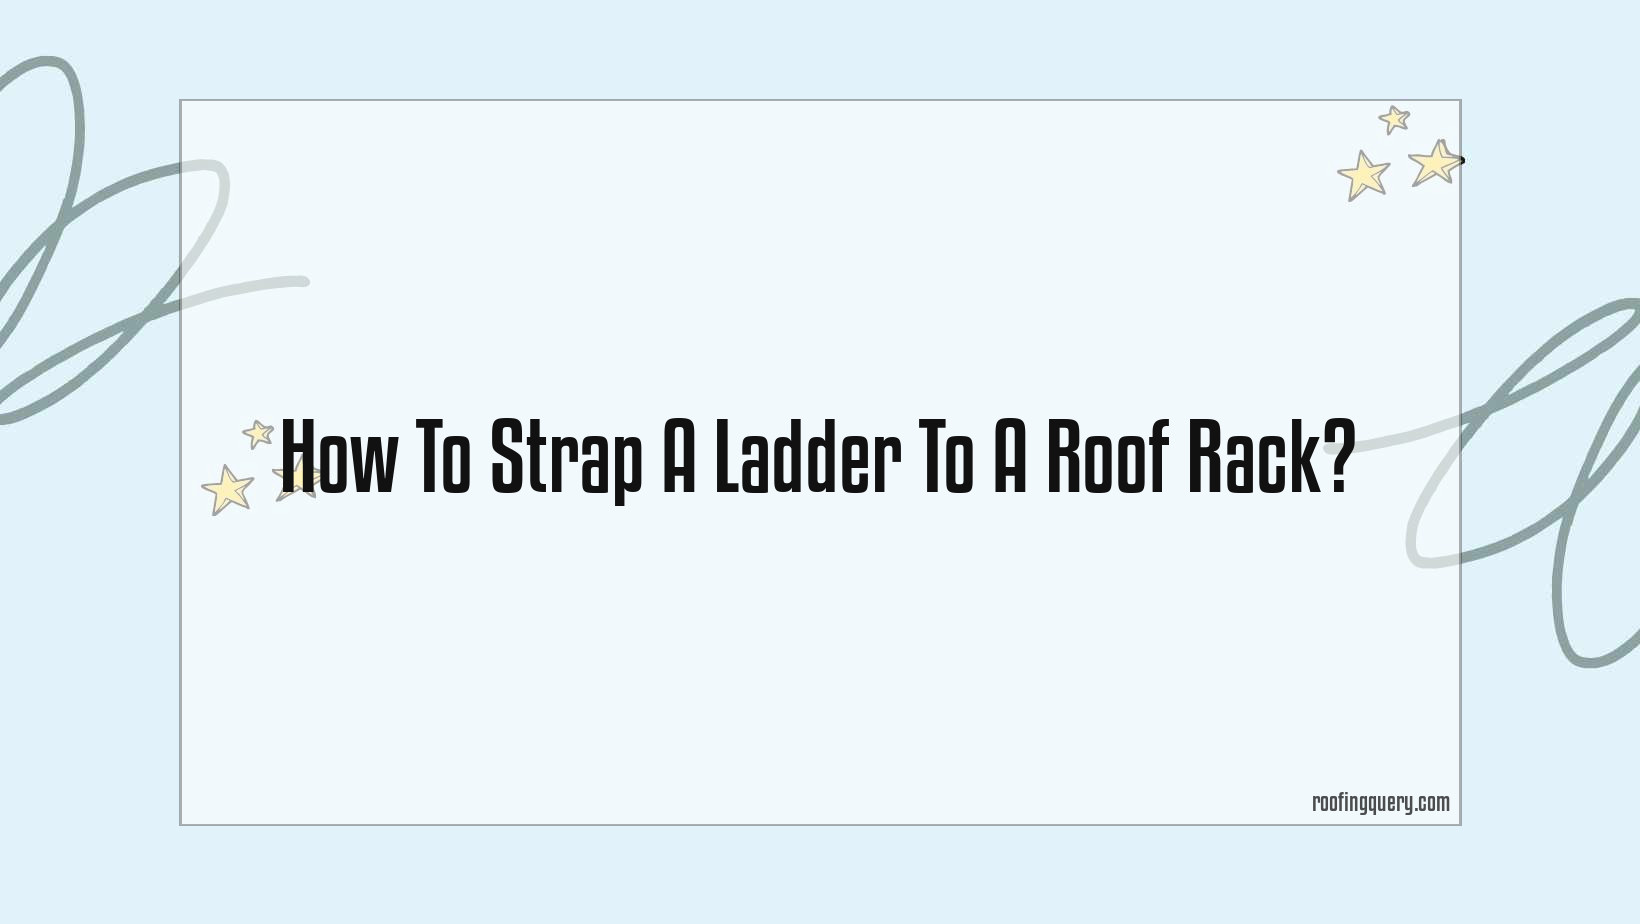 How To Strap A Ladder To A Roof Rack?